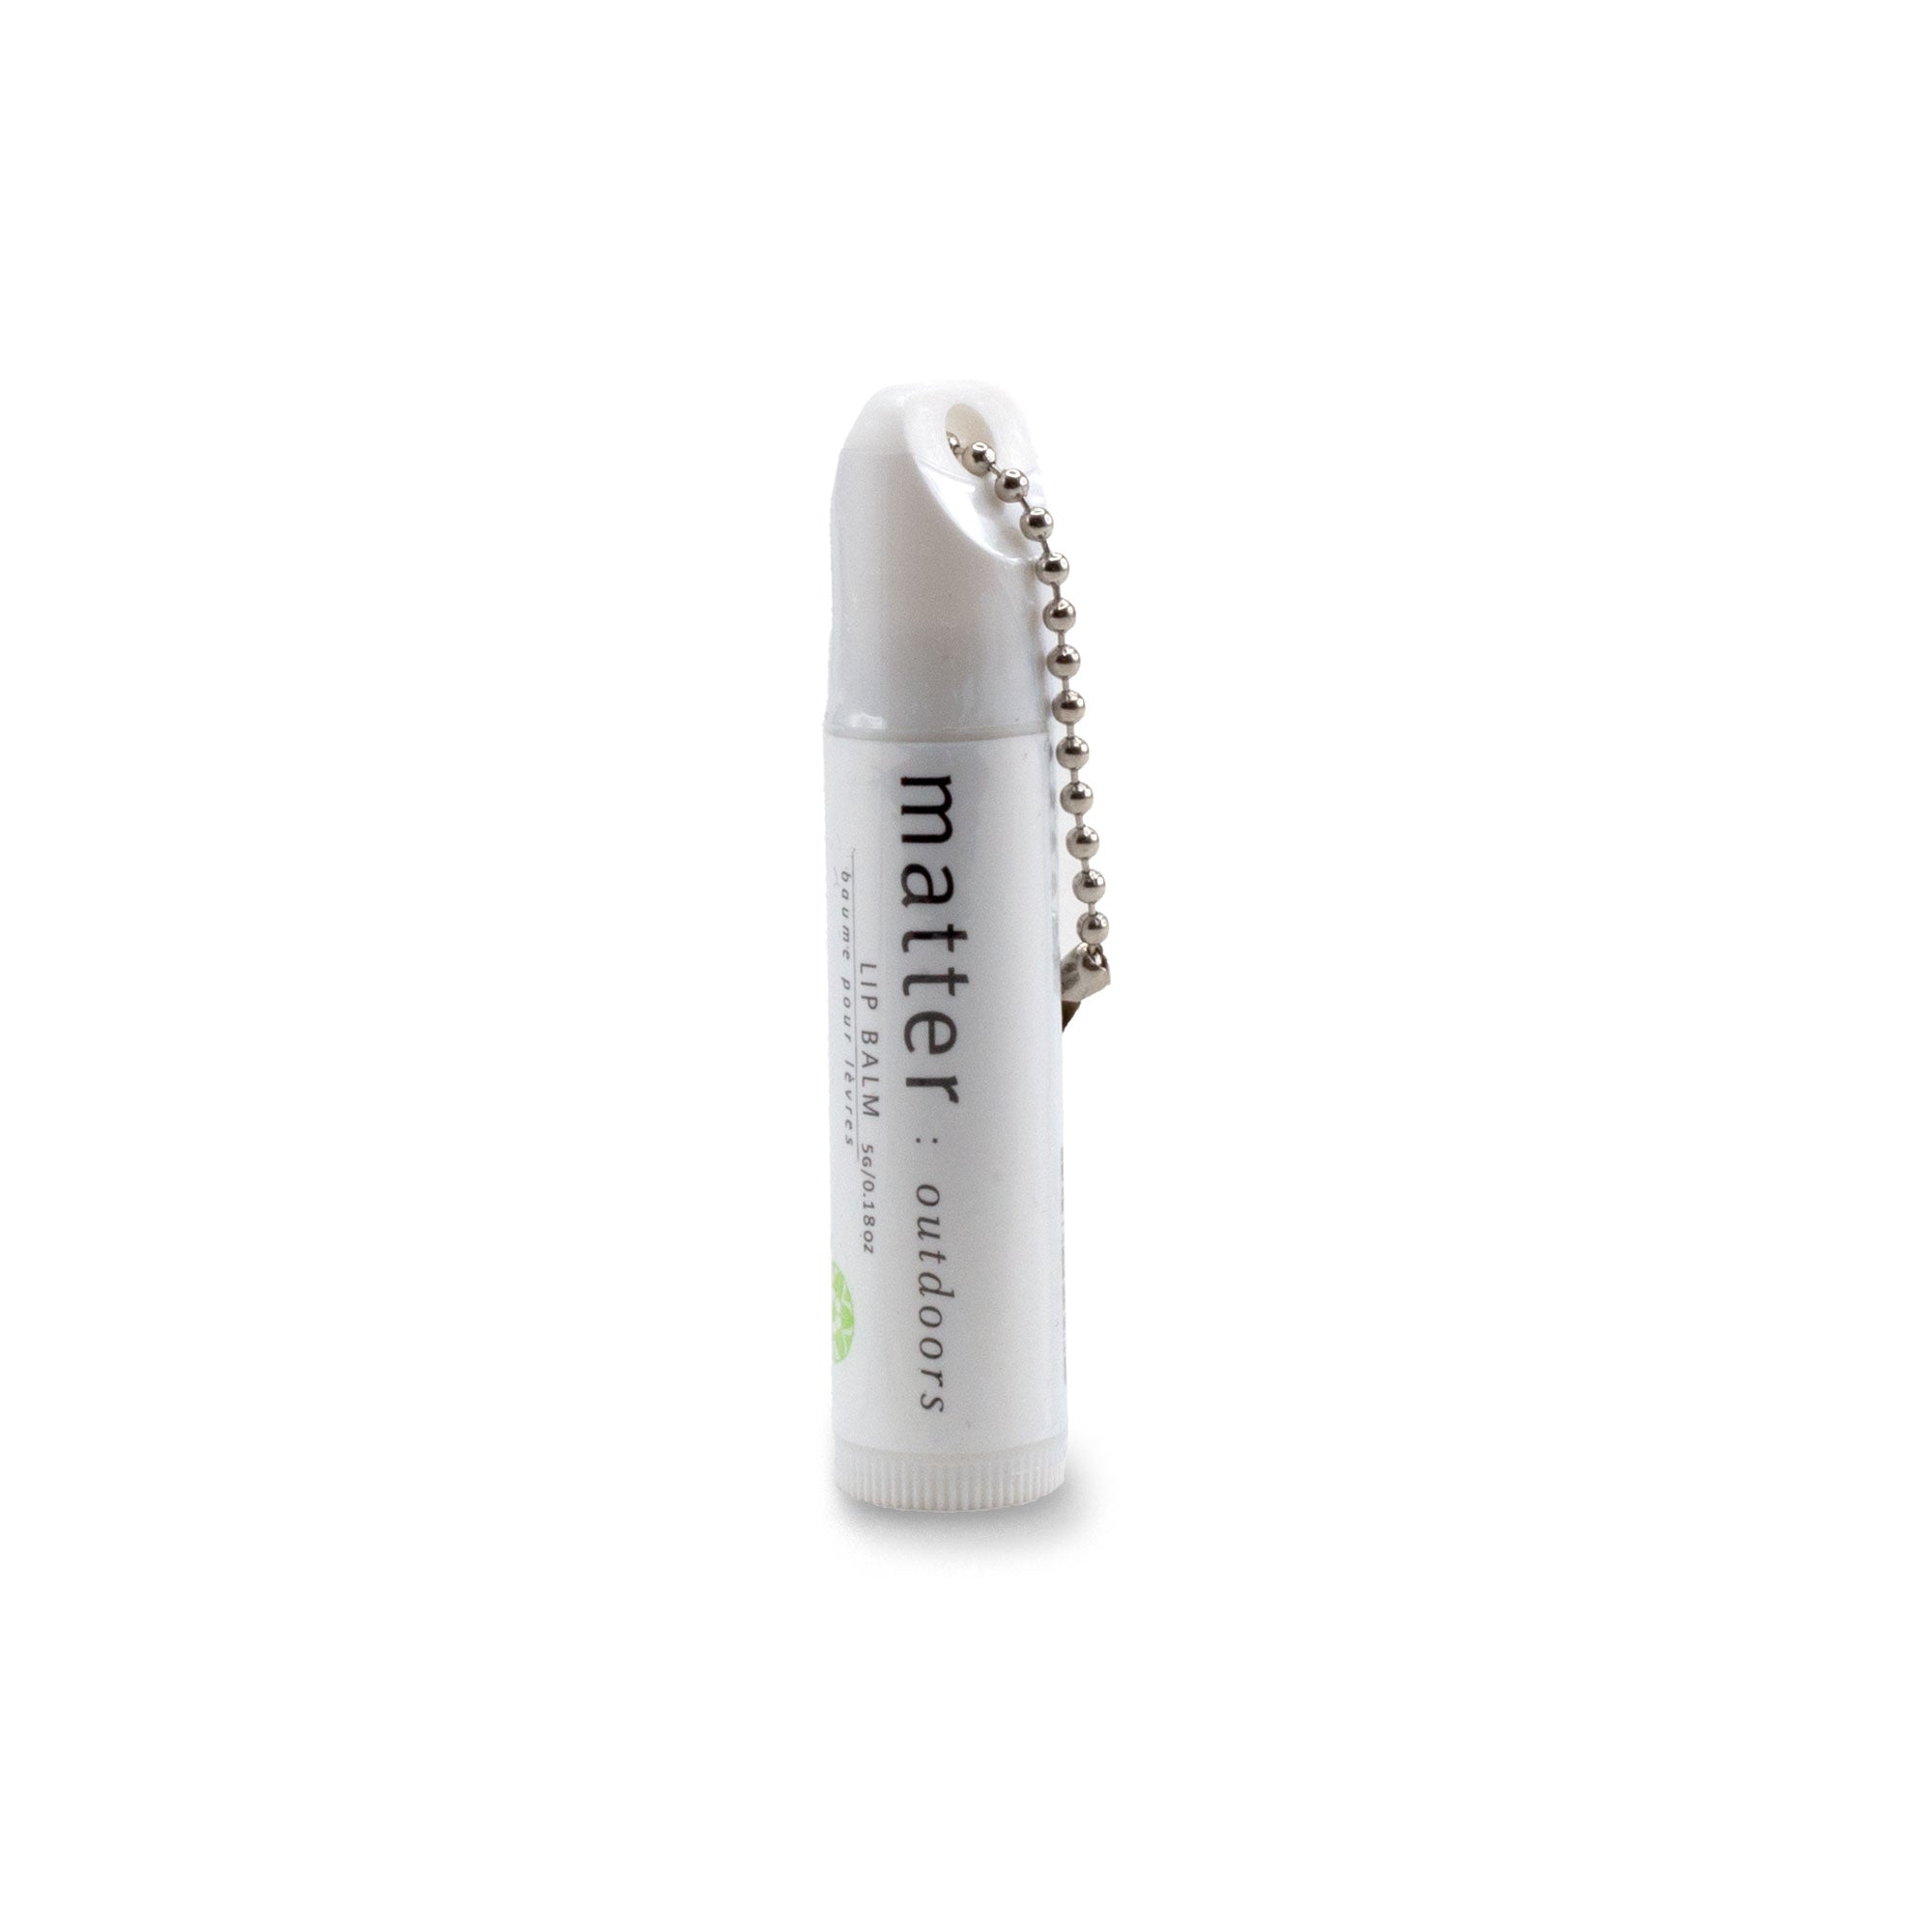 Matter Company - Outdoors Lip Balm with Chain